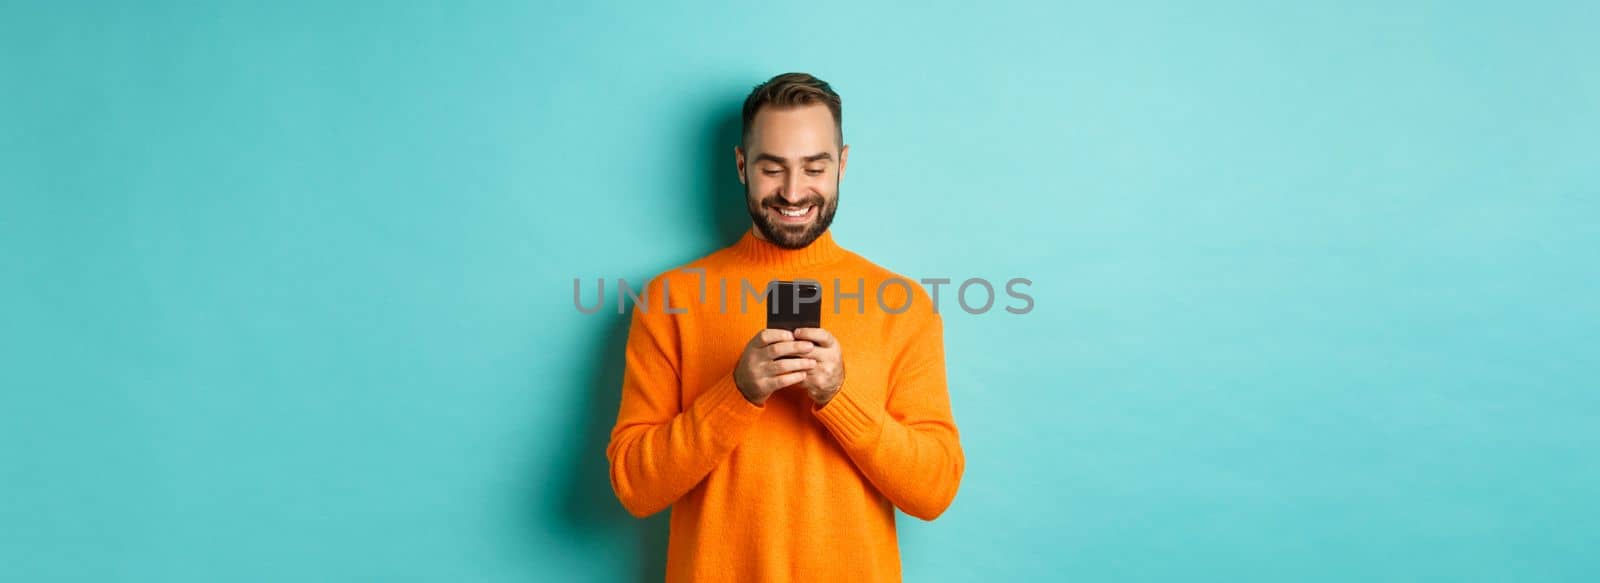 Handsome man smiling and texting message on mobile phone, communicating online, standing over light blue background.